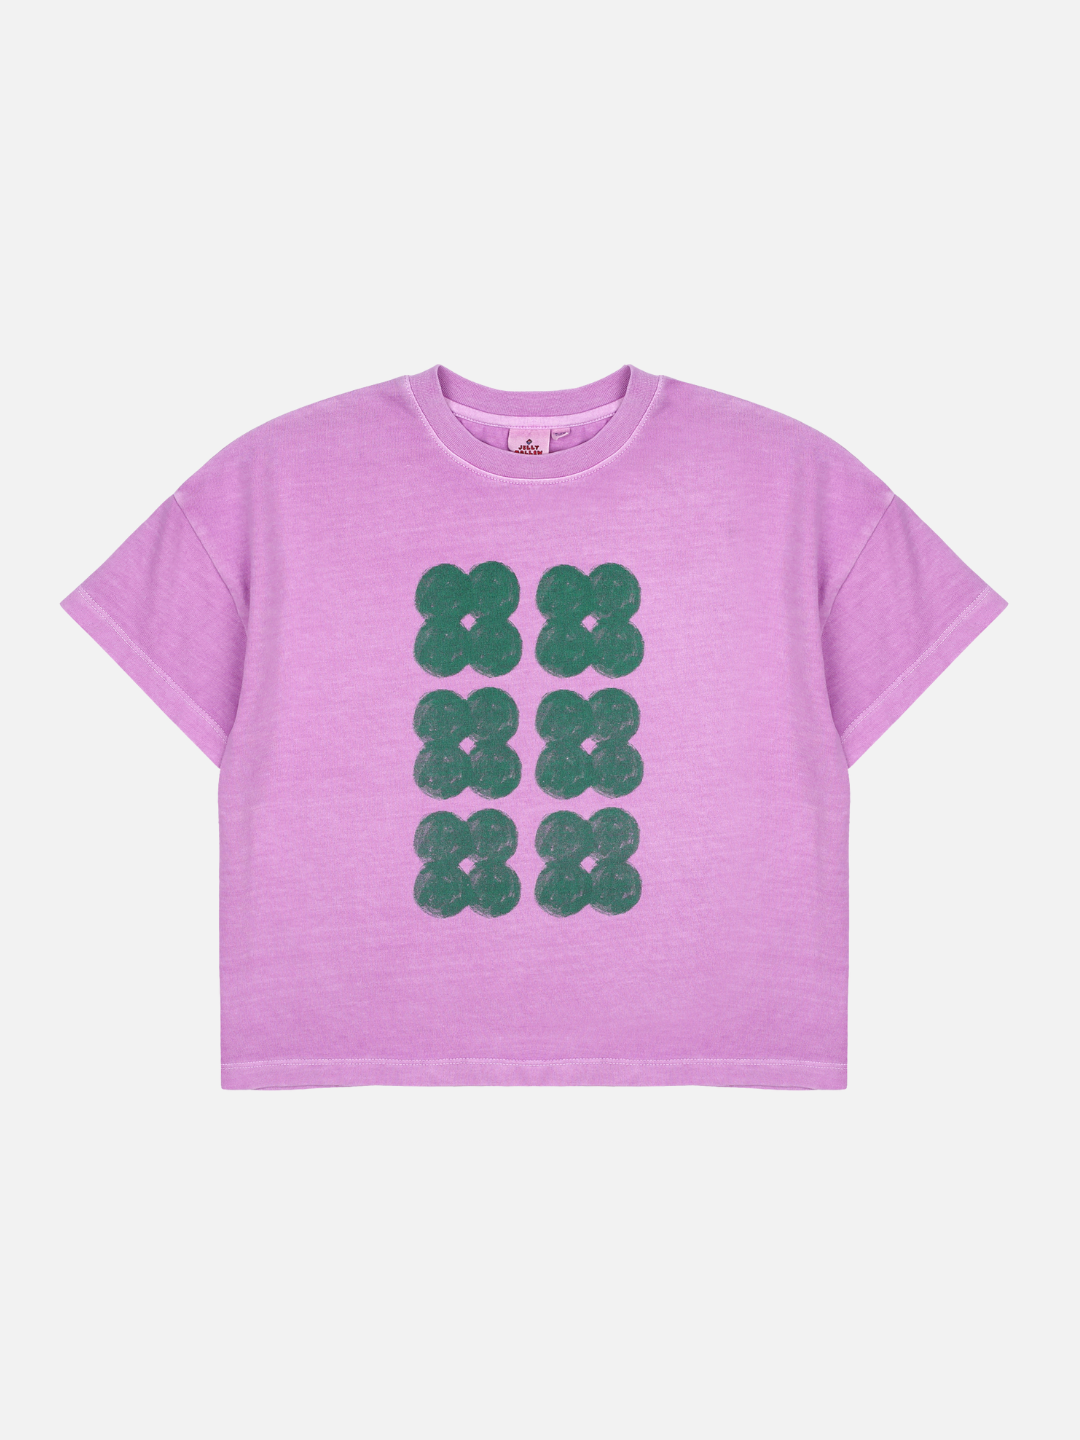 Front of T-shirt with six dark green clover shapes in two vertical rows on a light purple background.